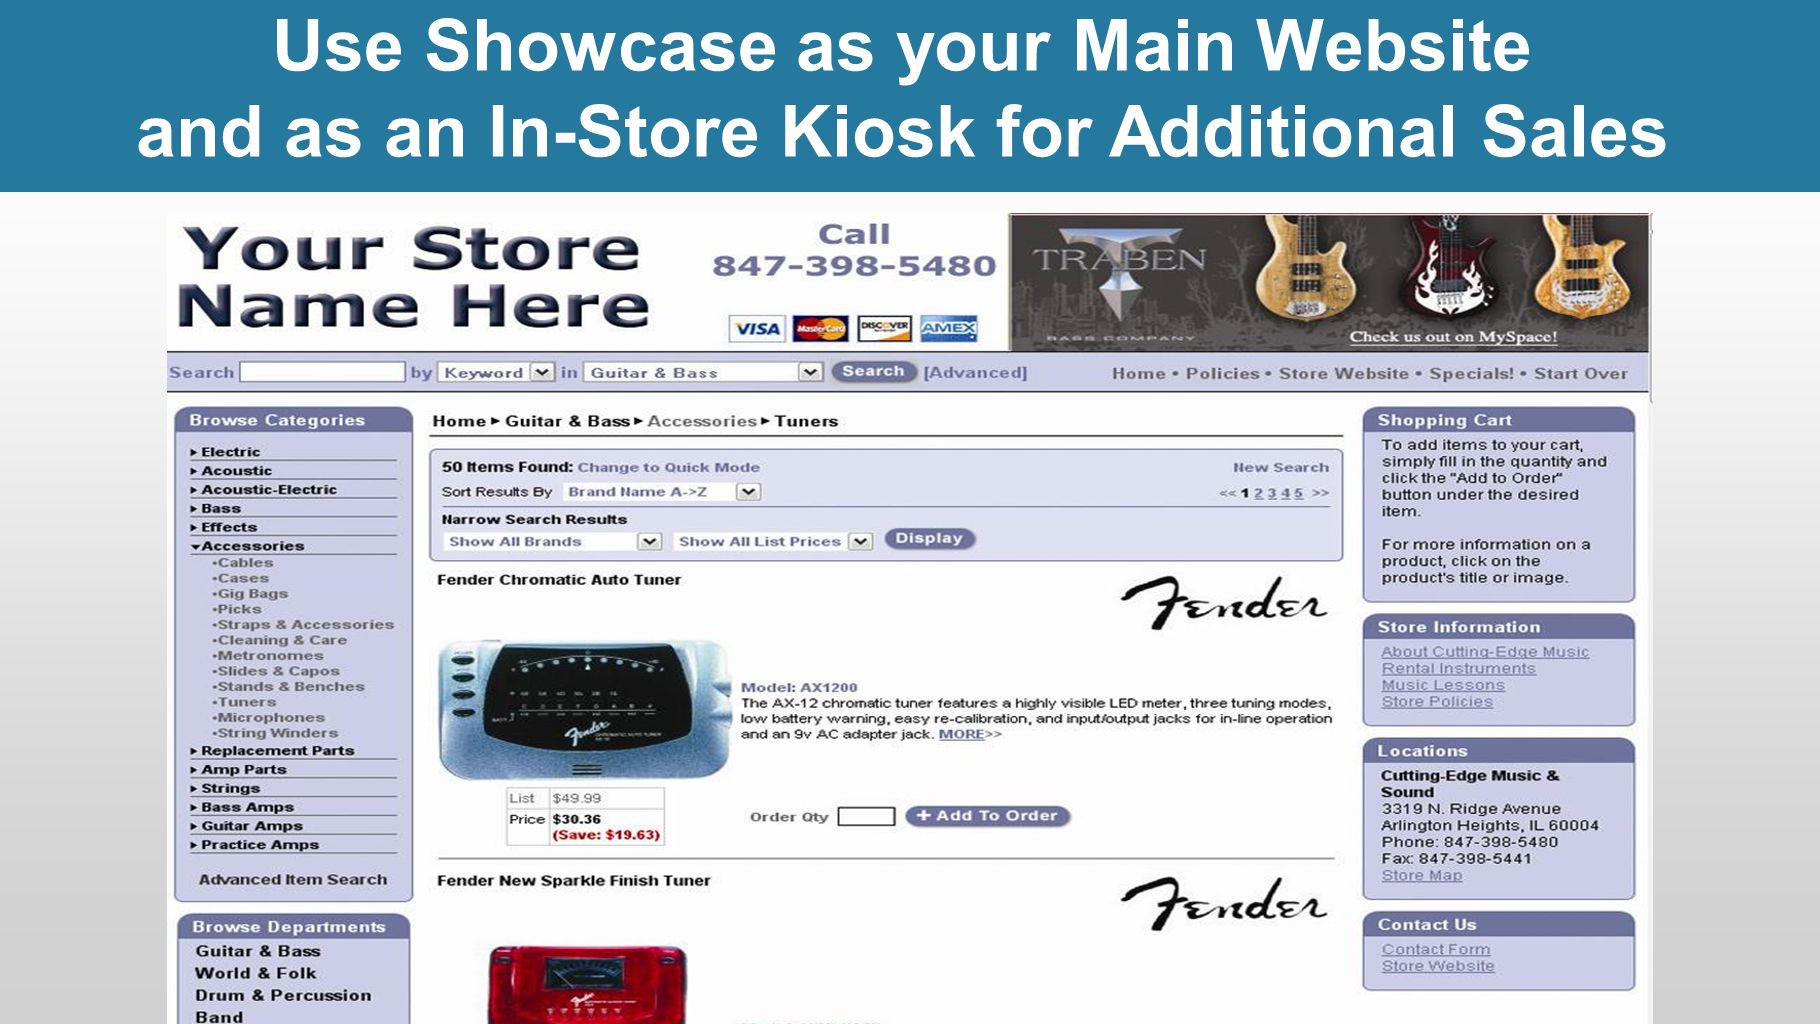 Use Showcase as your Main Website and as an In-Store Kiosk for Additional Sales